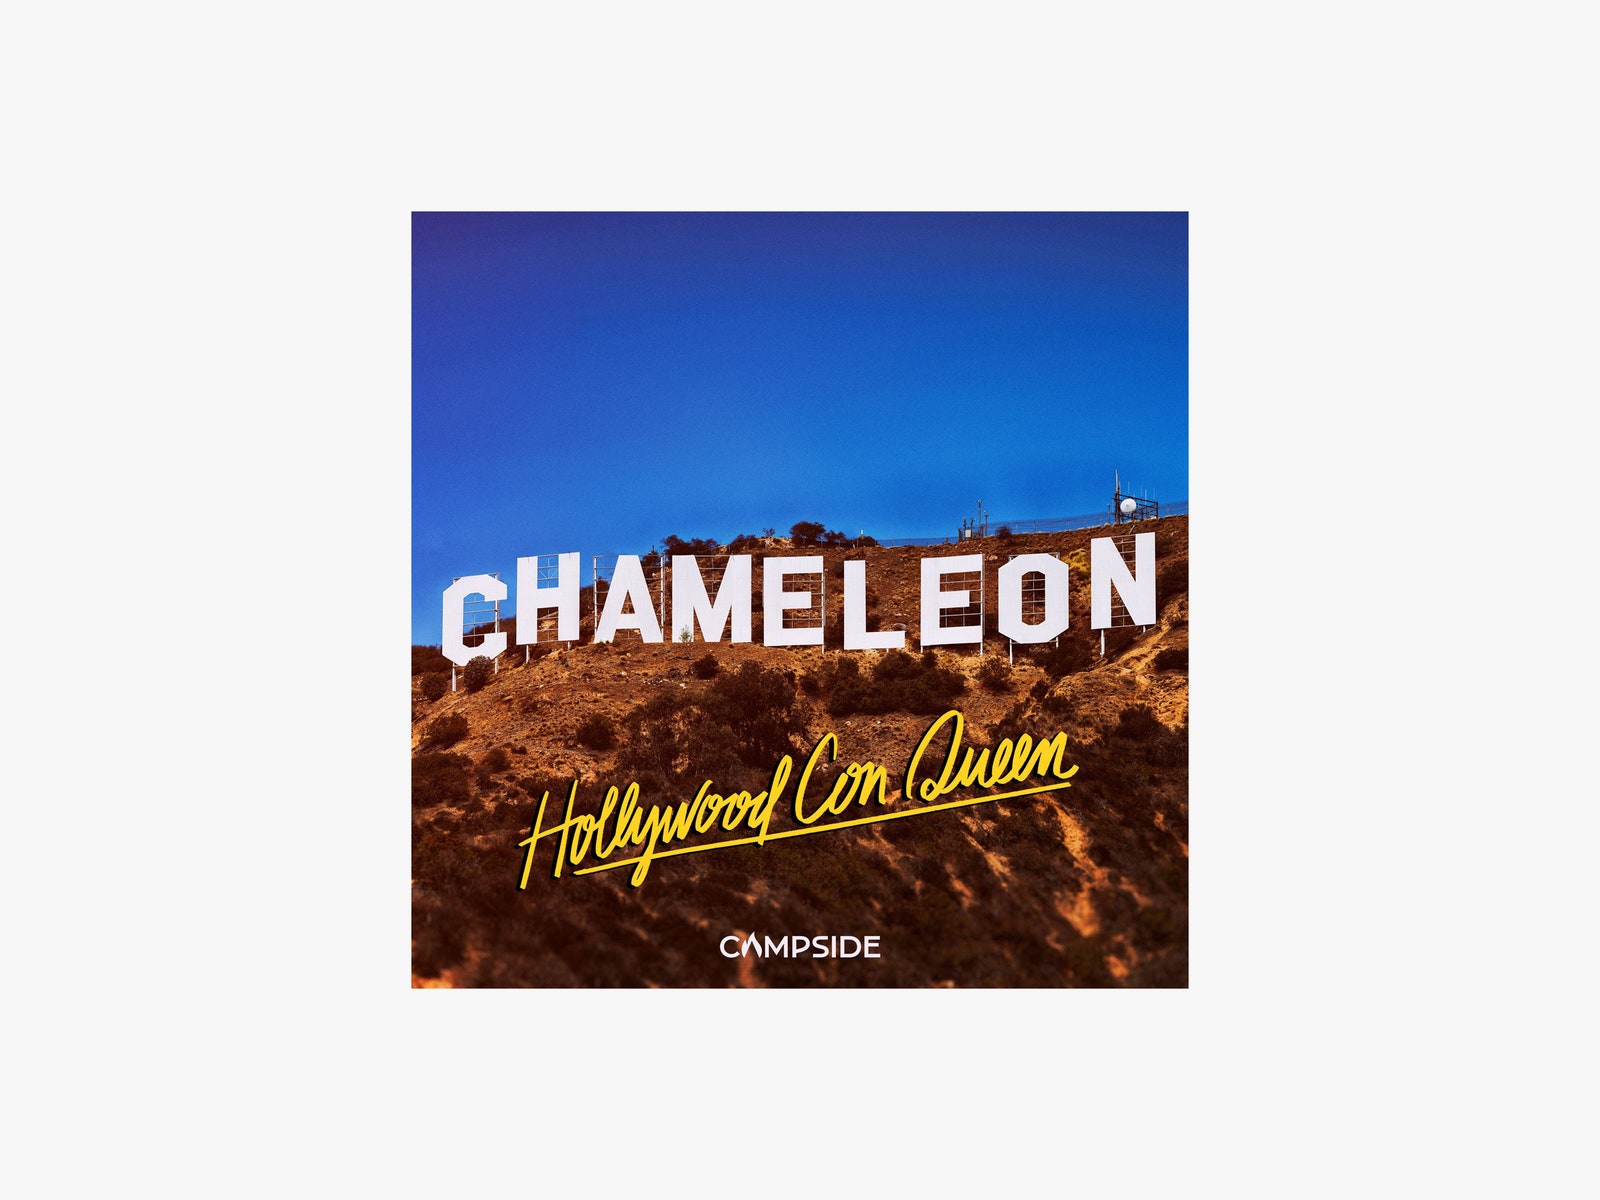 Chameleon Hollywood Con Queen podcast art